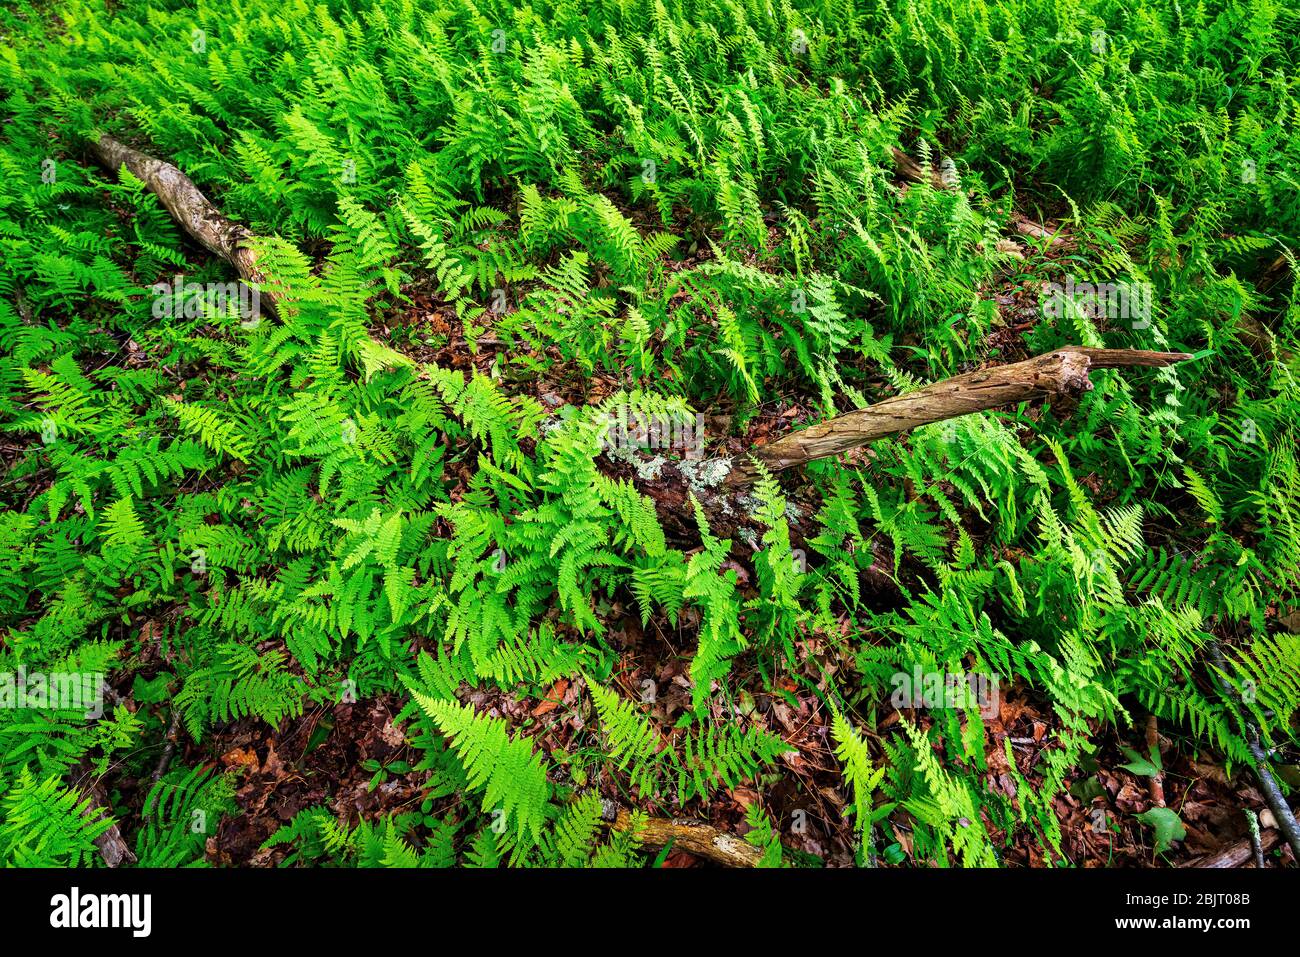 Lush green carpets of fern cover the forest floor near the Blackwater River in Canaan Valley of West Virginia. Stock Photo